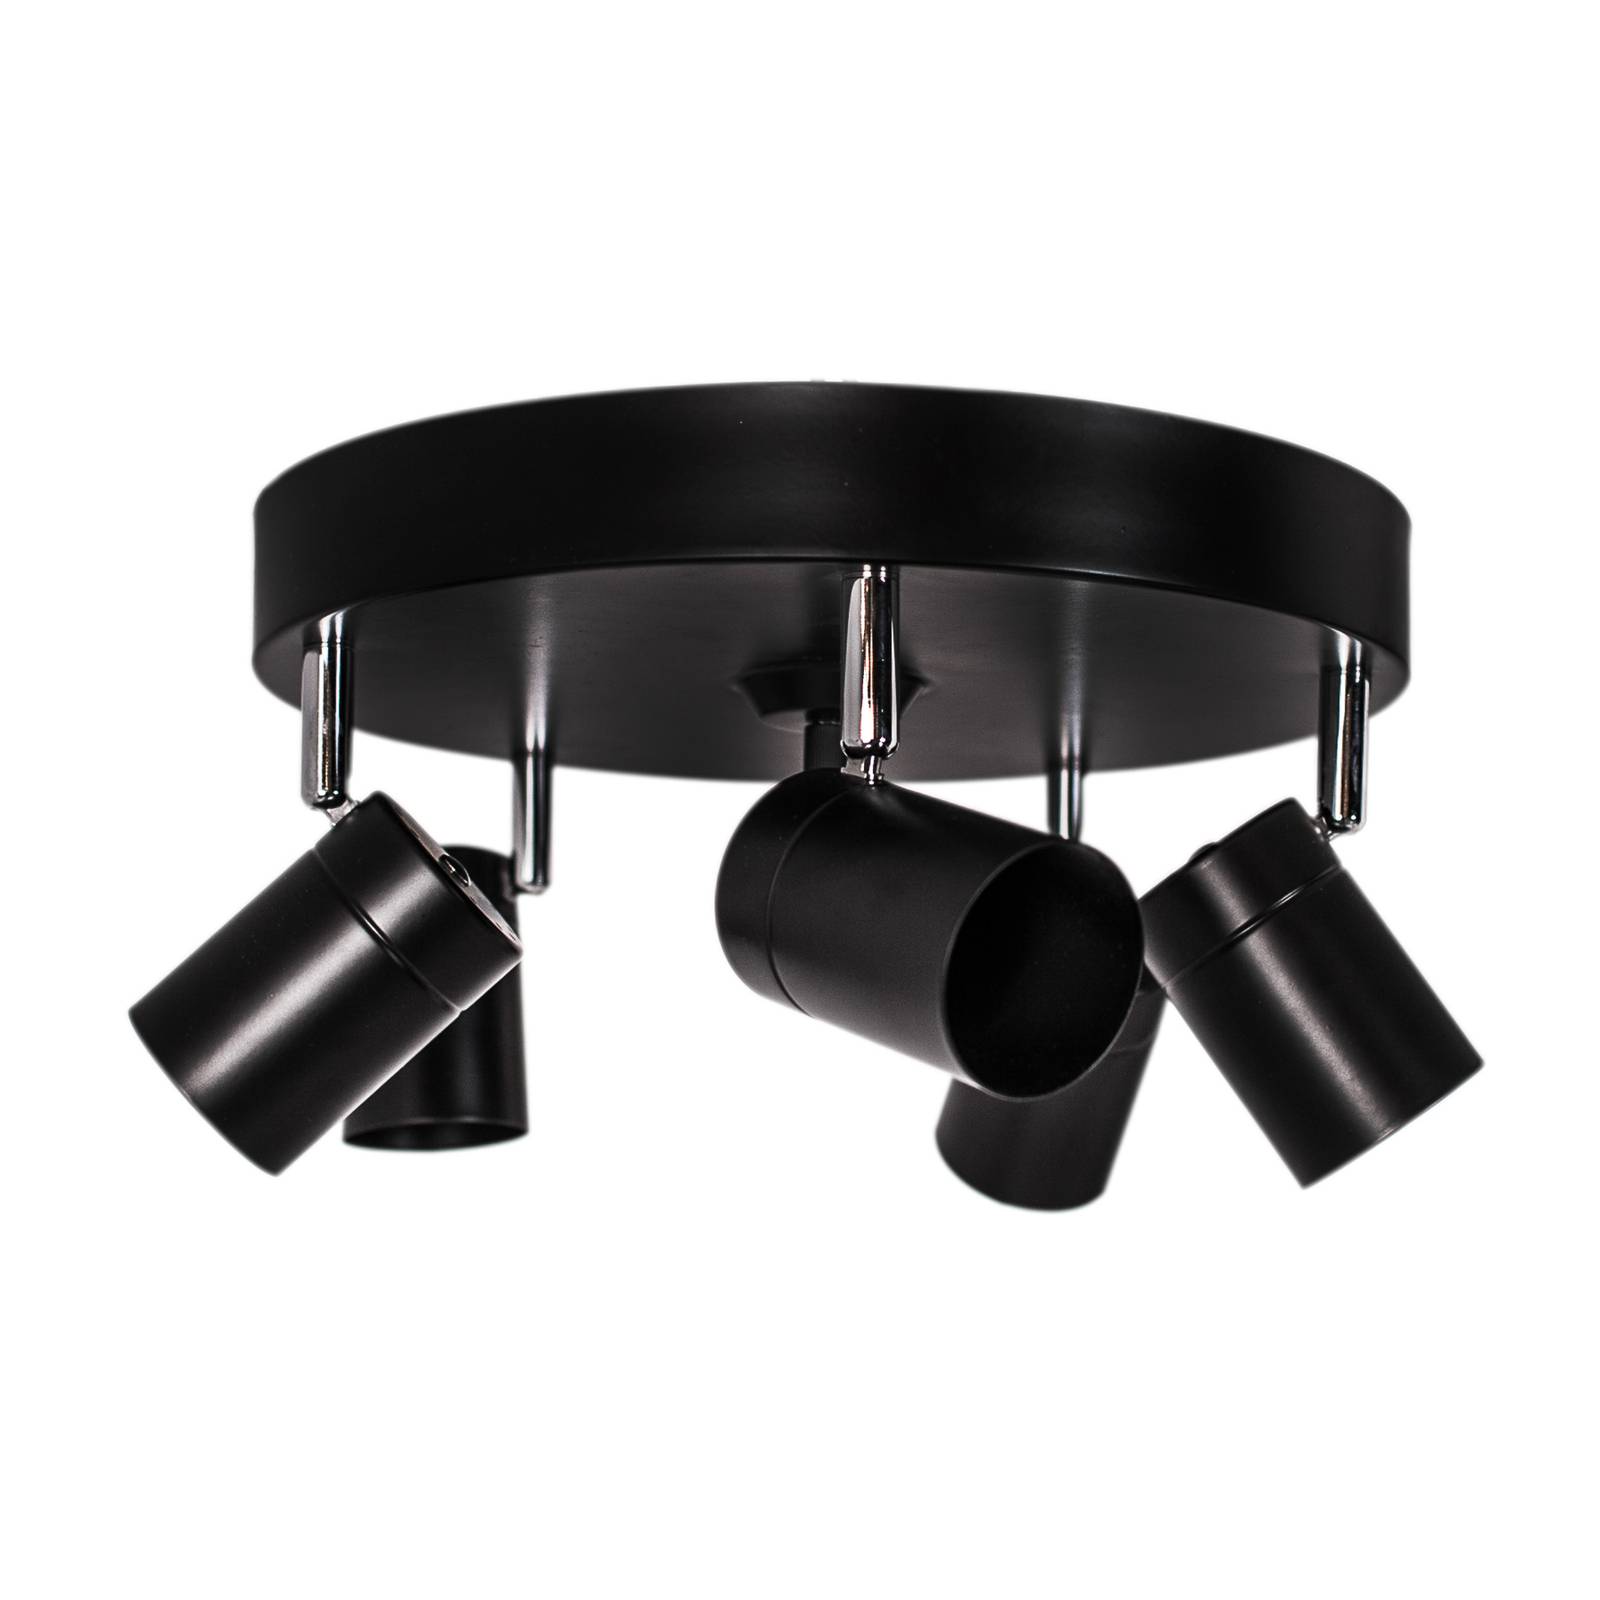 By Rydns Correct spot soffitto 5 luci nero satin